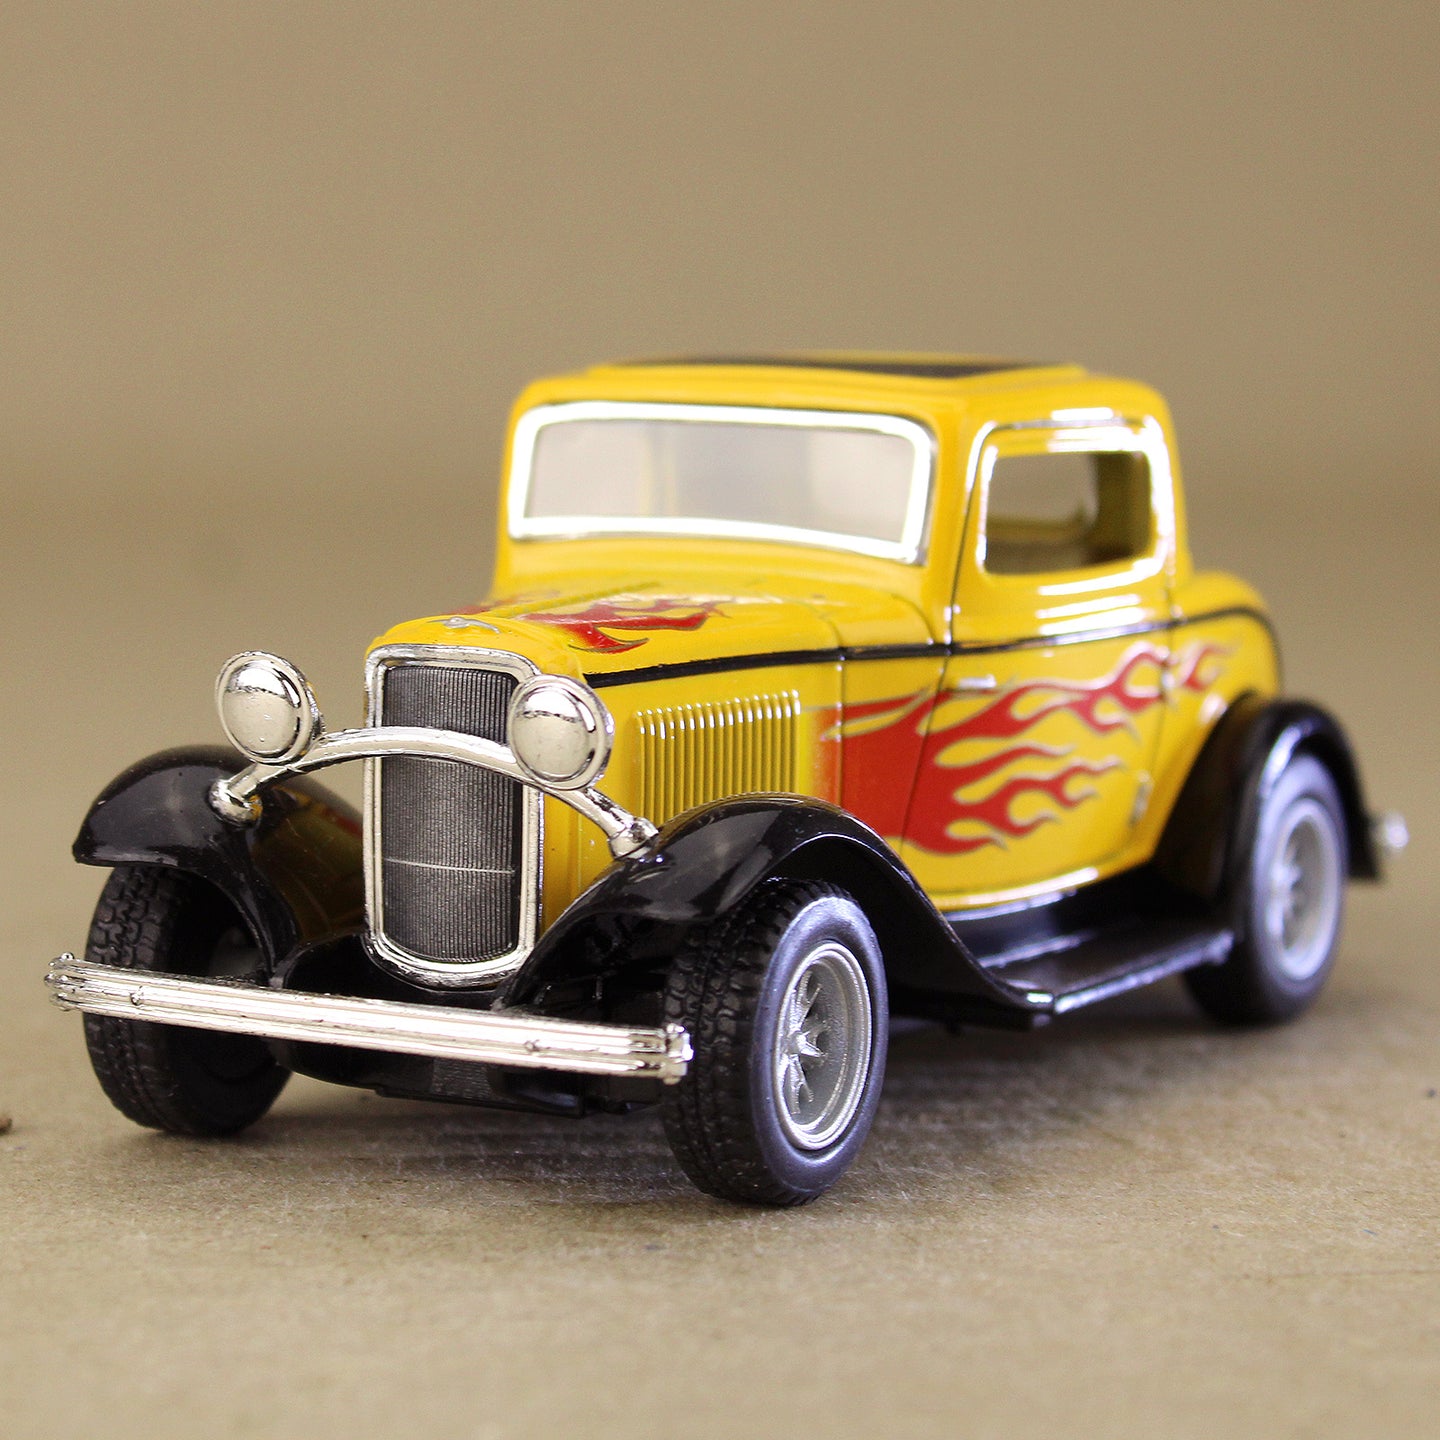 1932 Yellow Ford Coupe with Flames